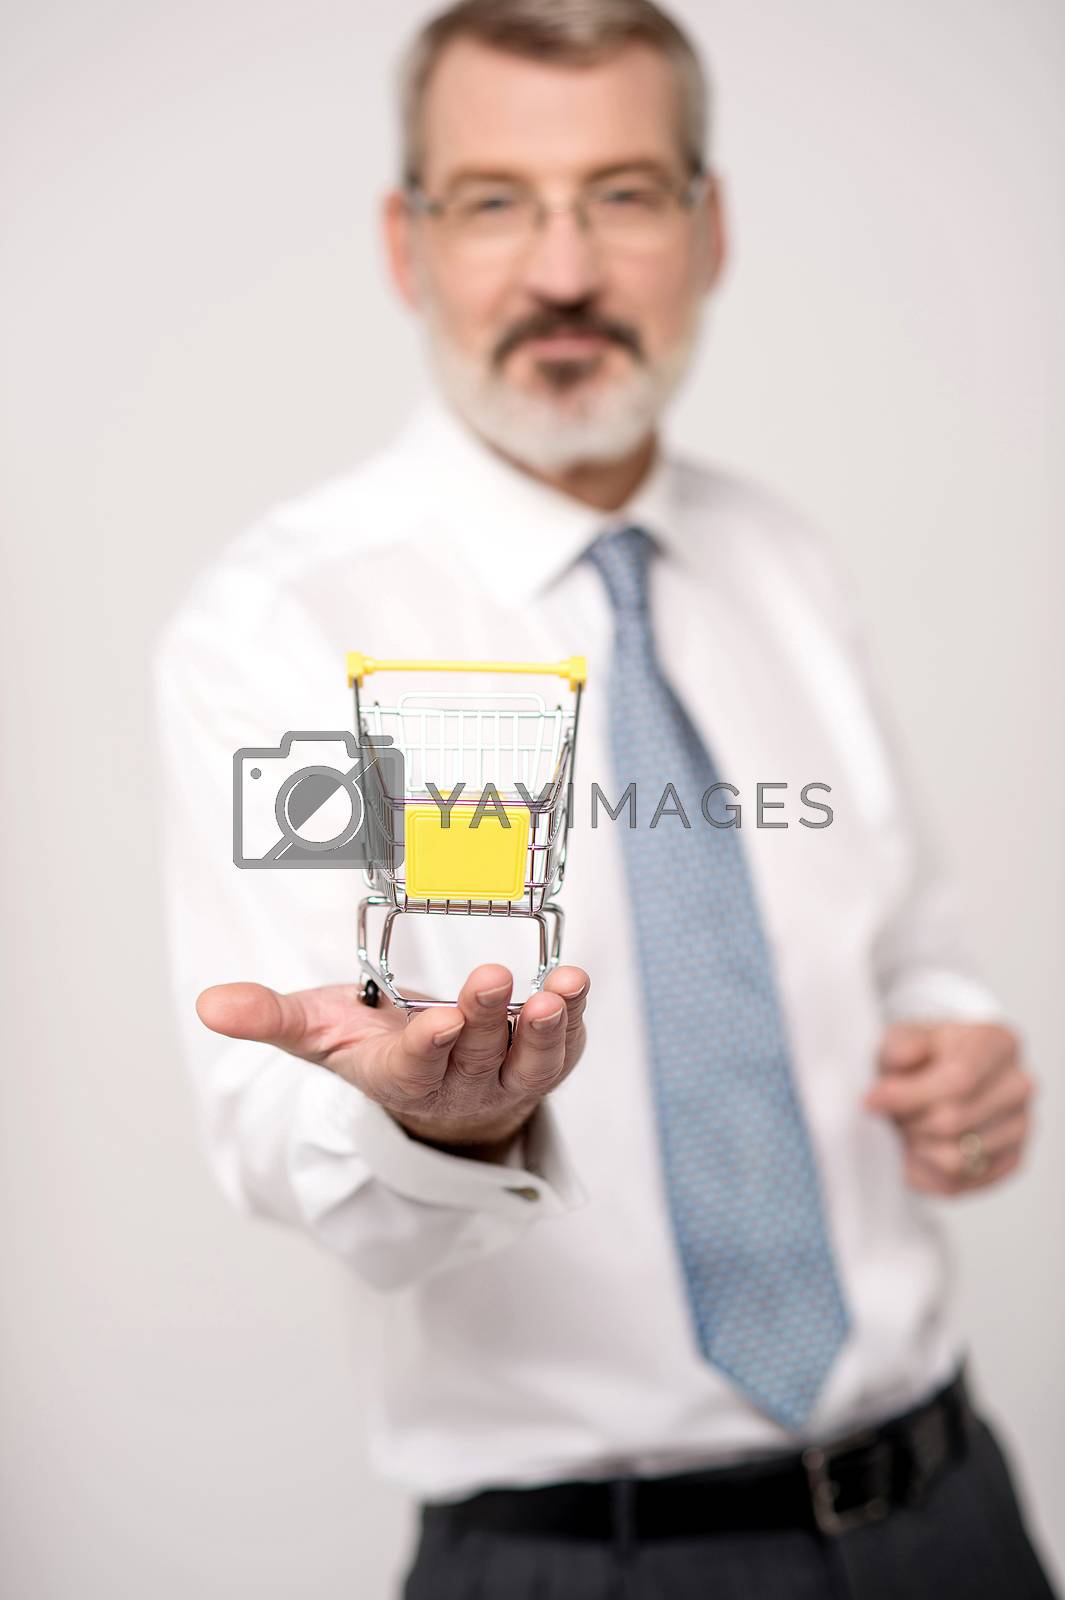 Royalty free image of Take your business to e-commerce level. by stockyimages